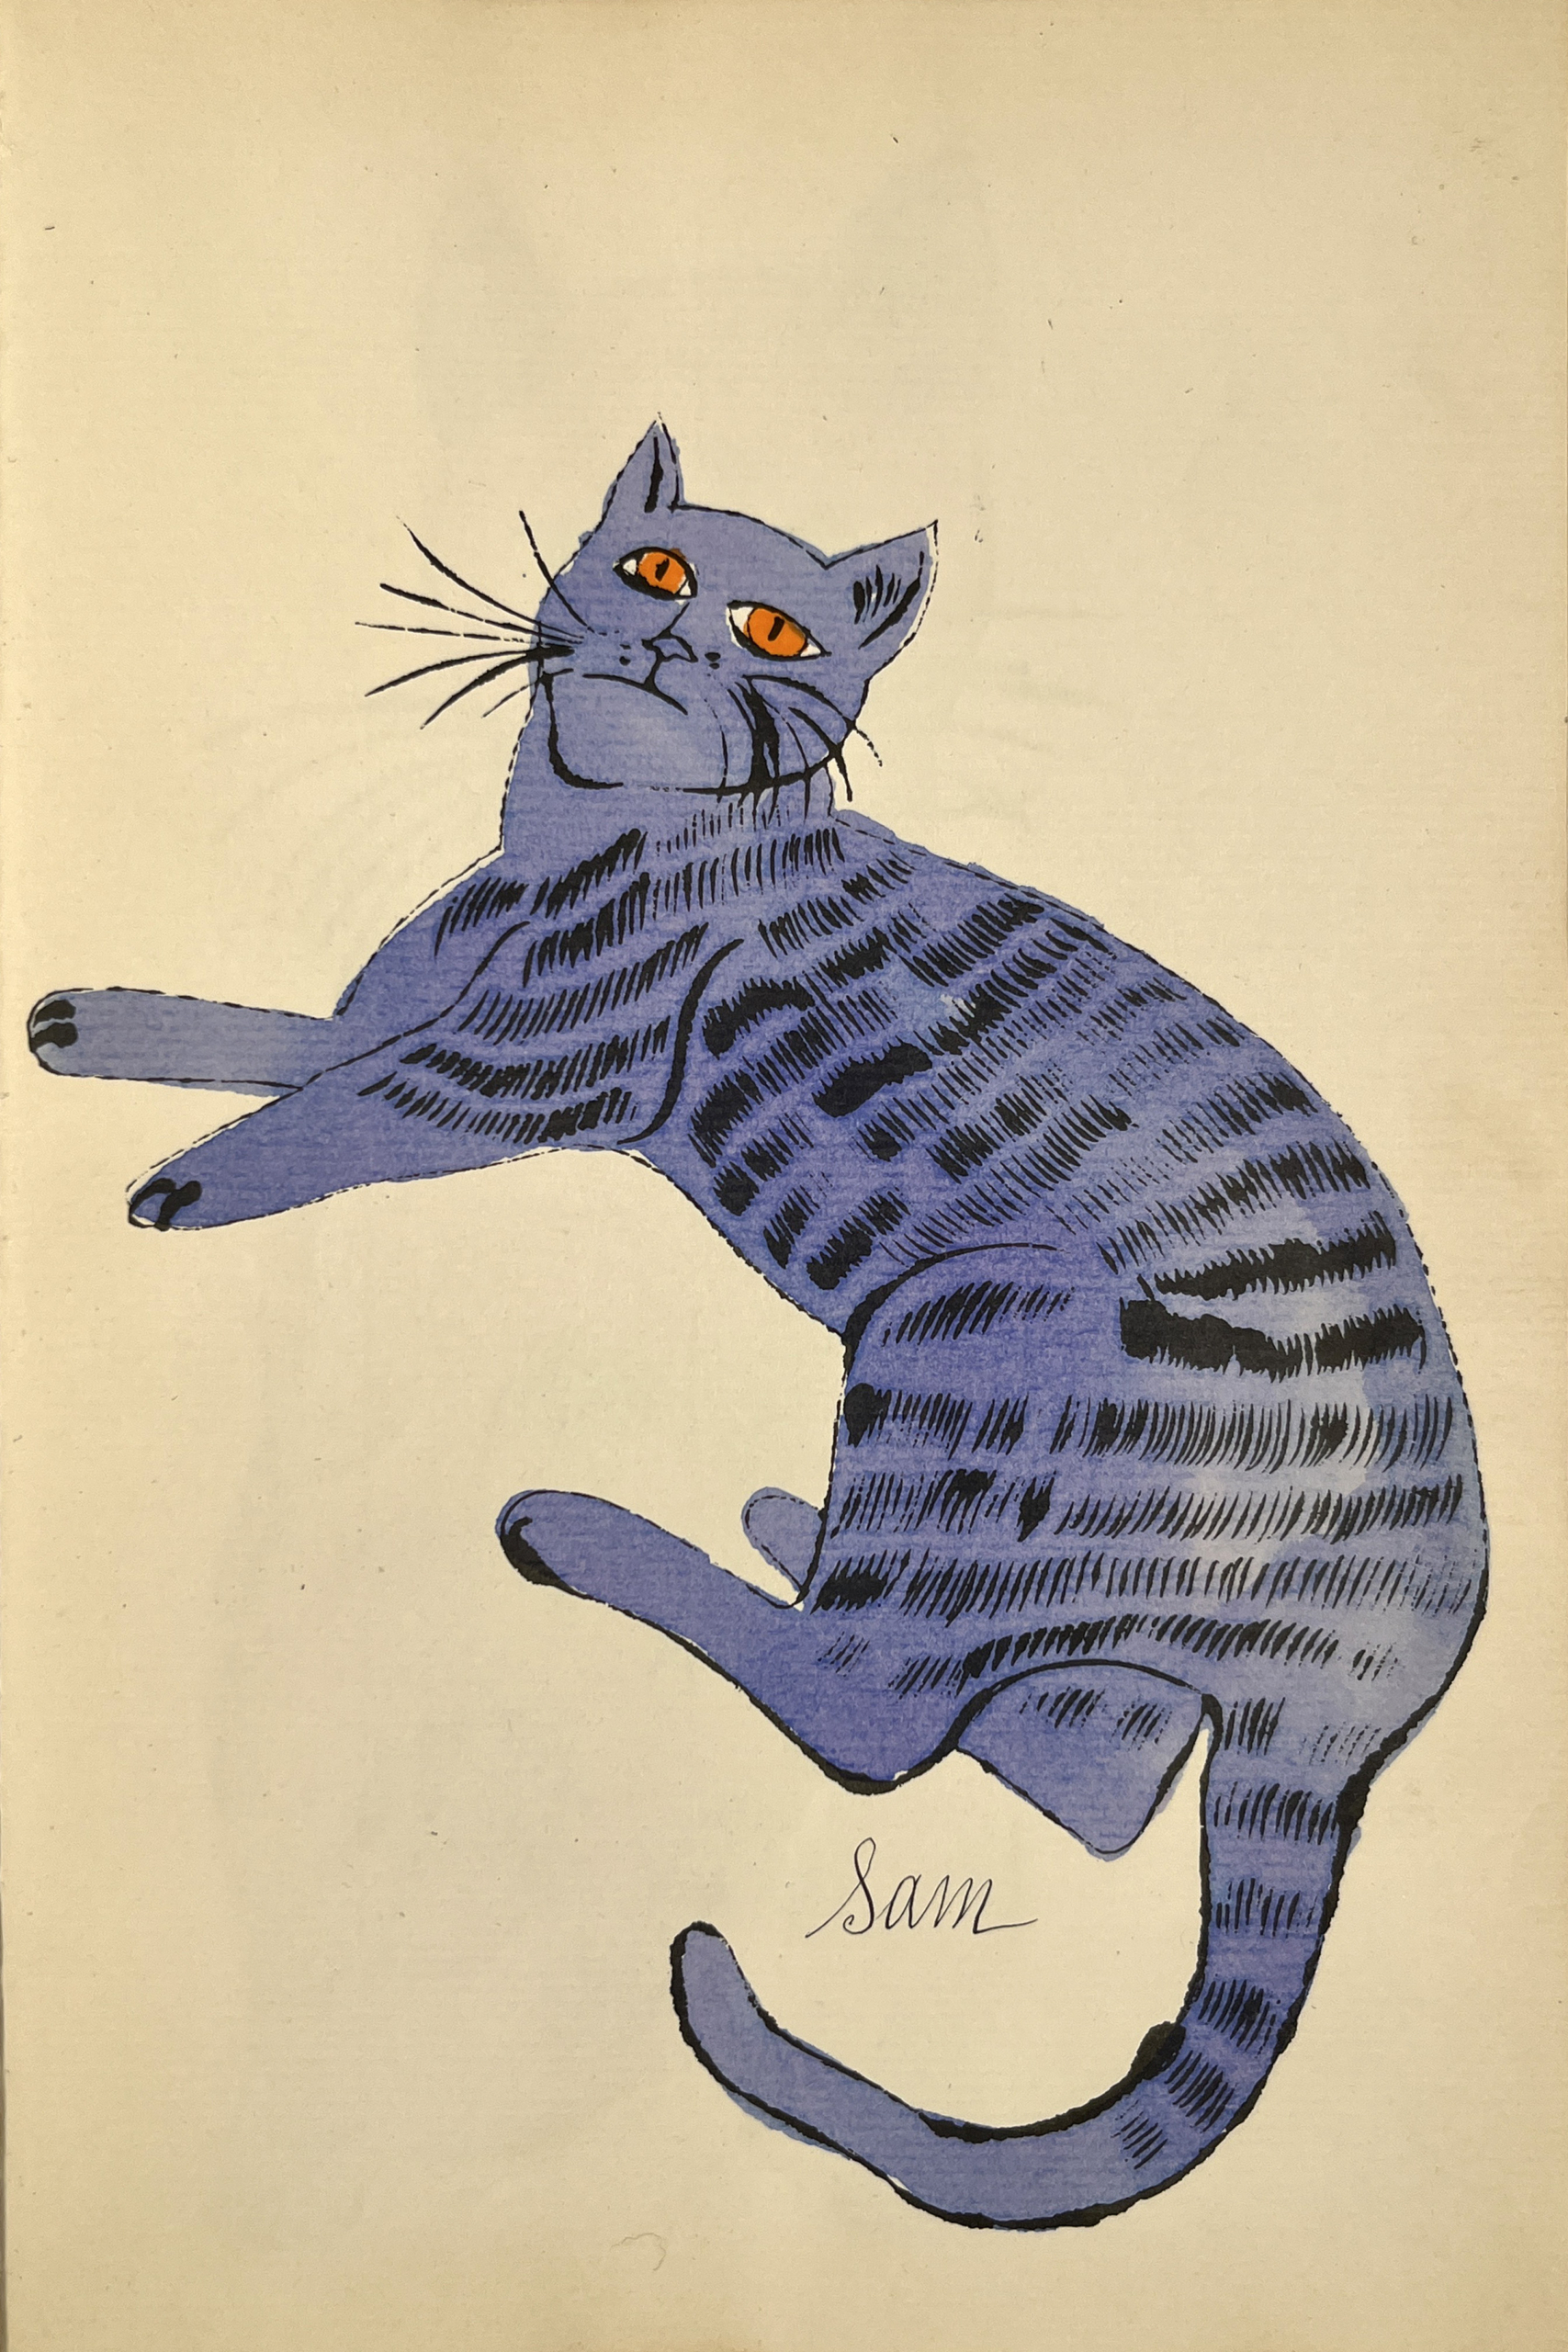 Andy Warhol | 25 Cats Name[d] Sam and One Blue Pussy, IV.52B | CA. 1954